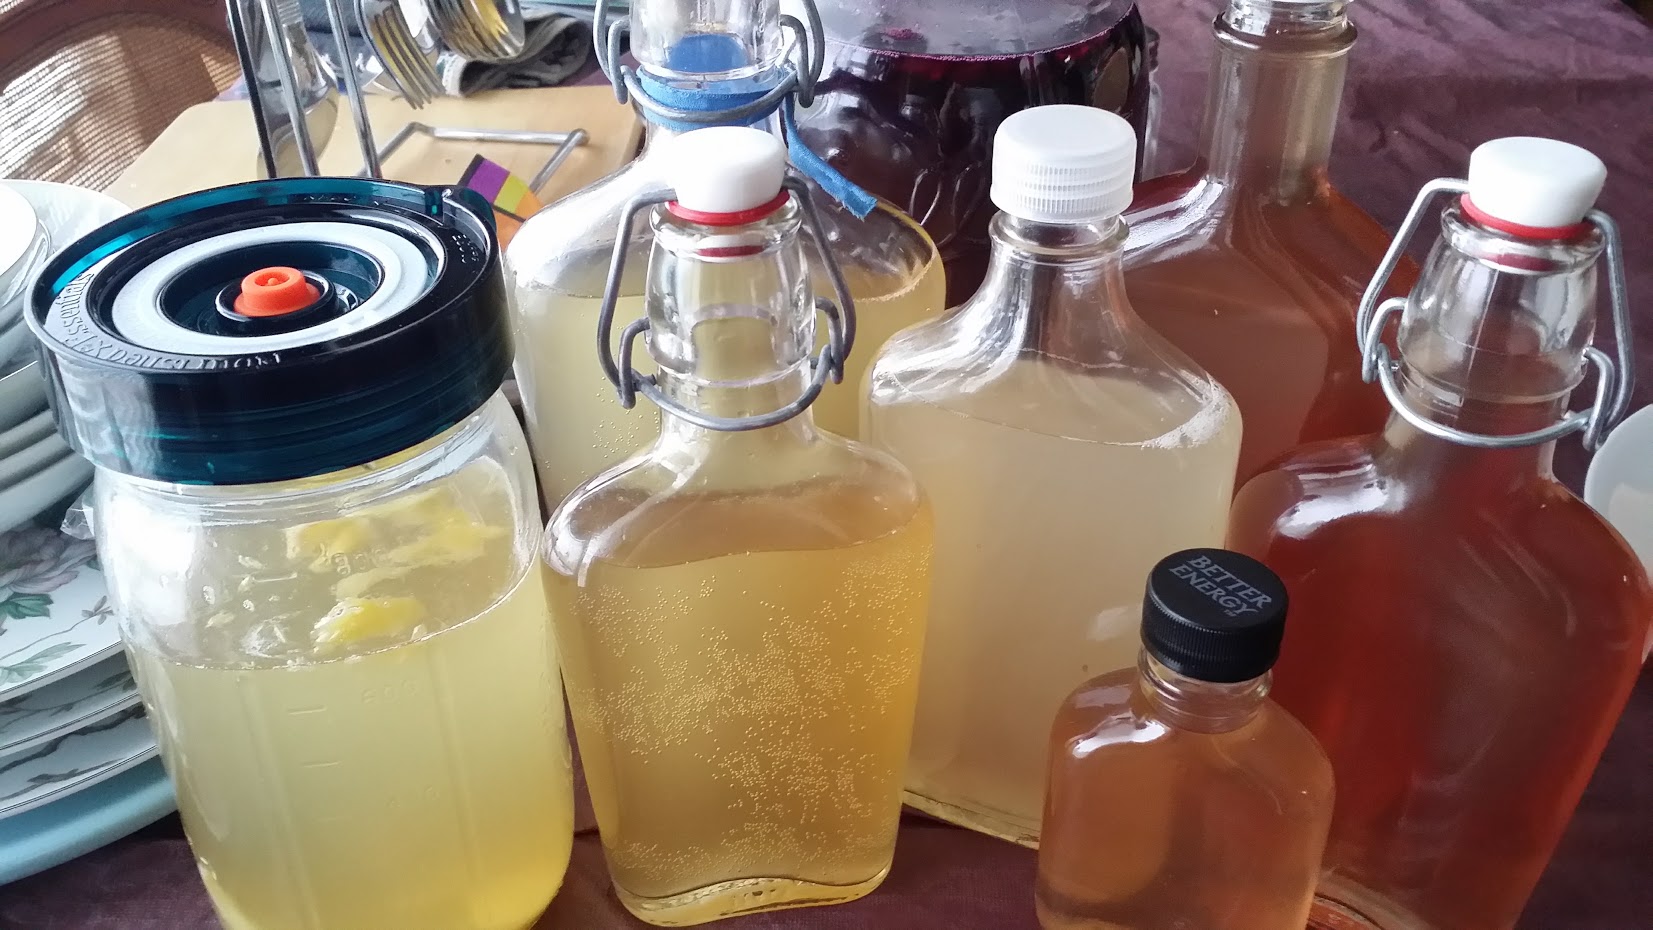 Different kinds of kvass, some showing the bubbles from carbonation.